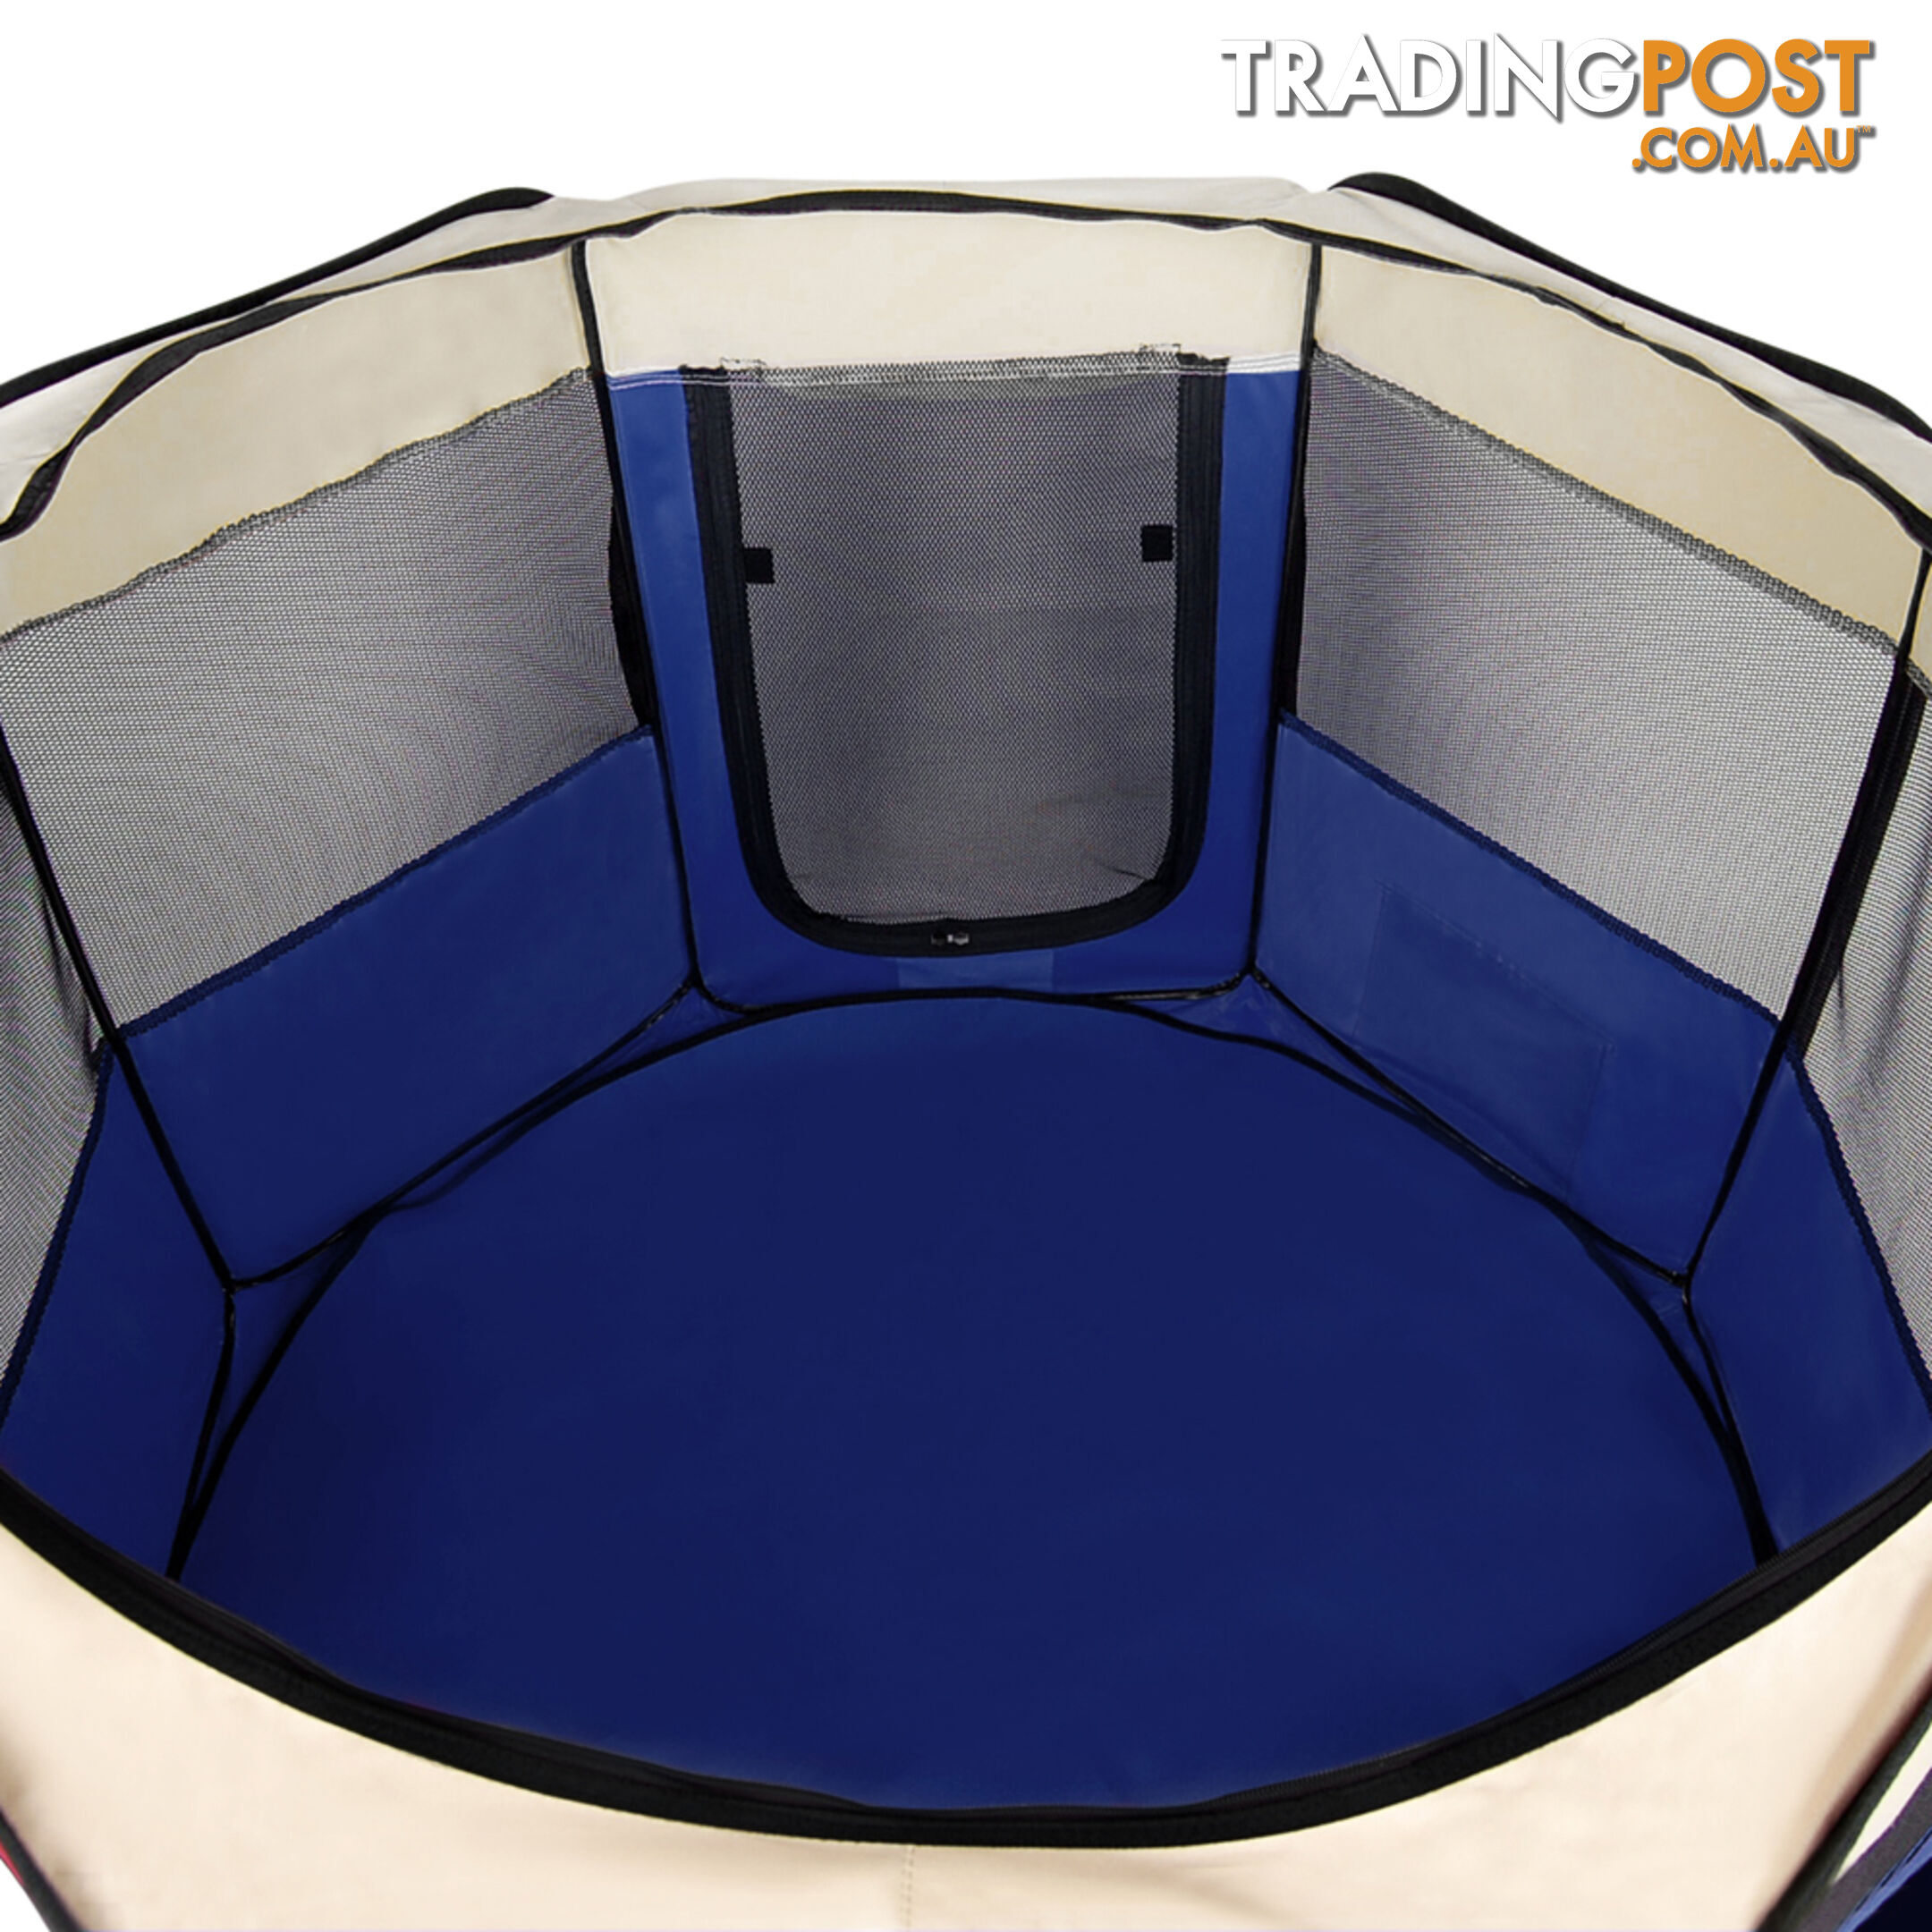 XL Portable Pet Playpen 8 Panel Dog Puppy Cat Exercise Soft Cage Crate Tent Blue